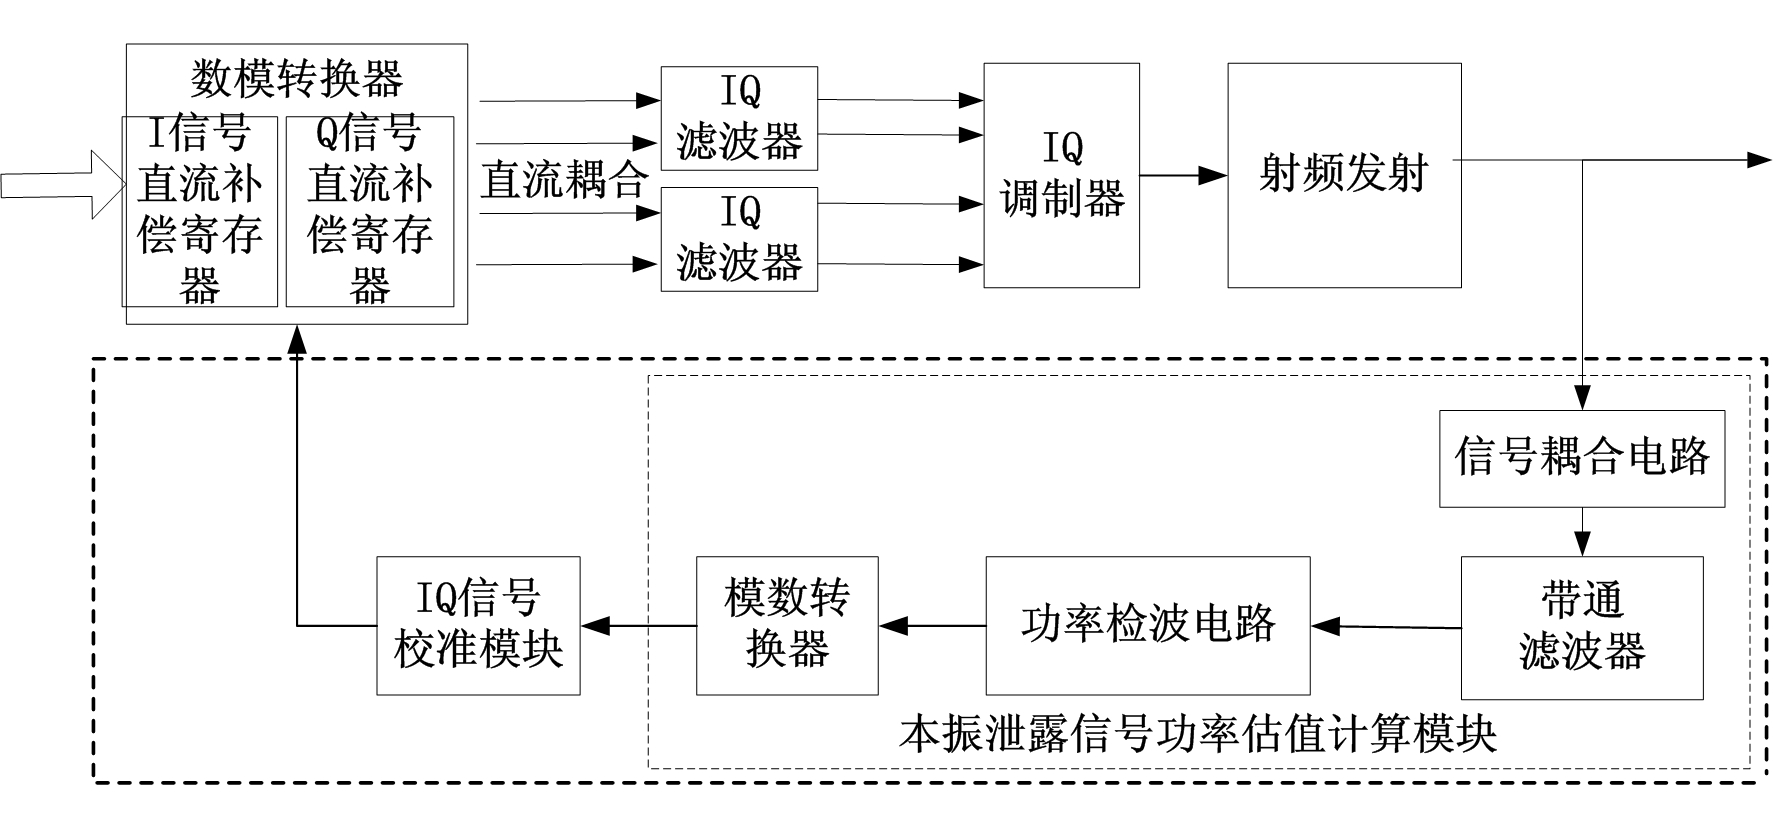 Method and device for IQ (intelligence quotient) signal real-time calibration